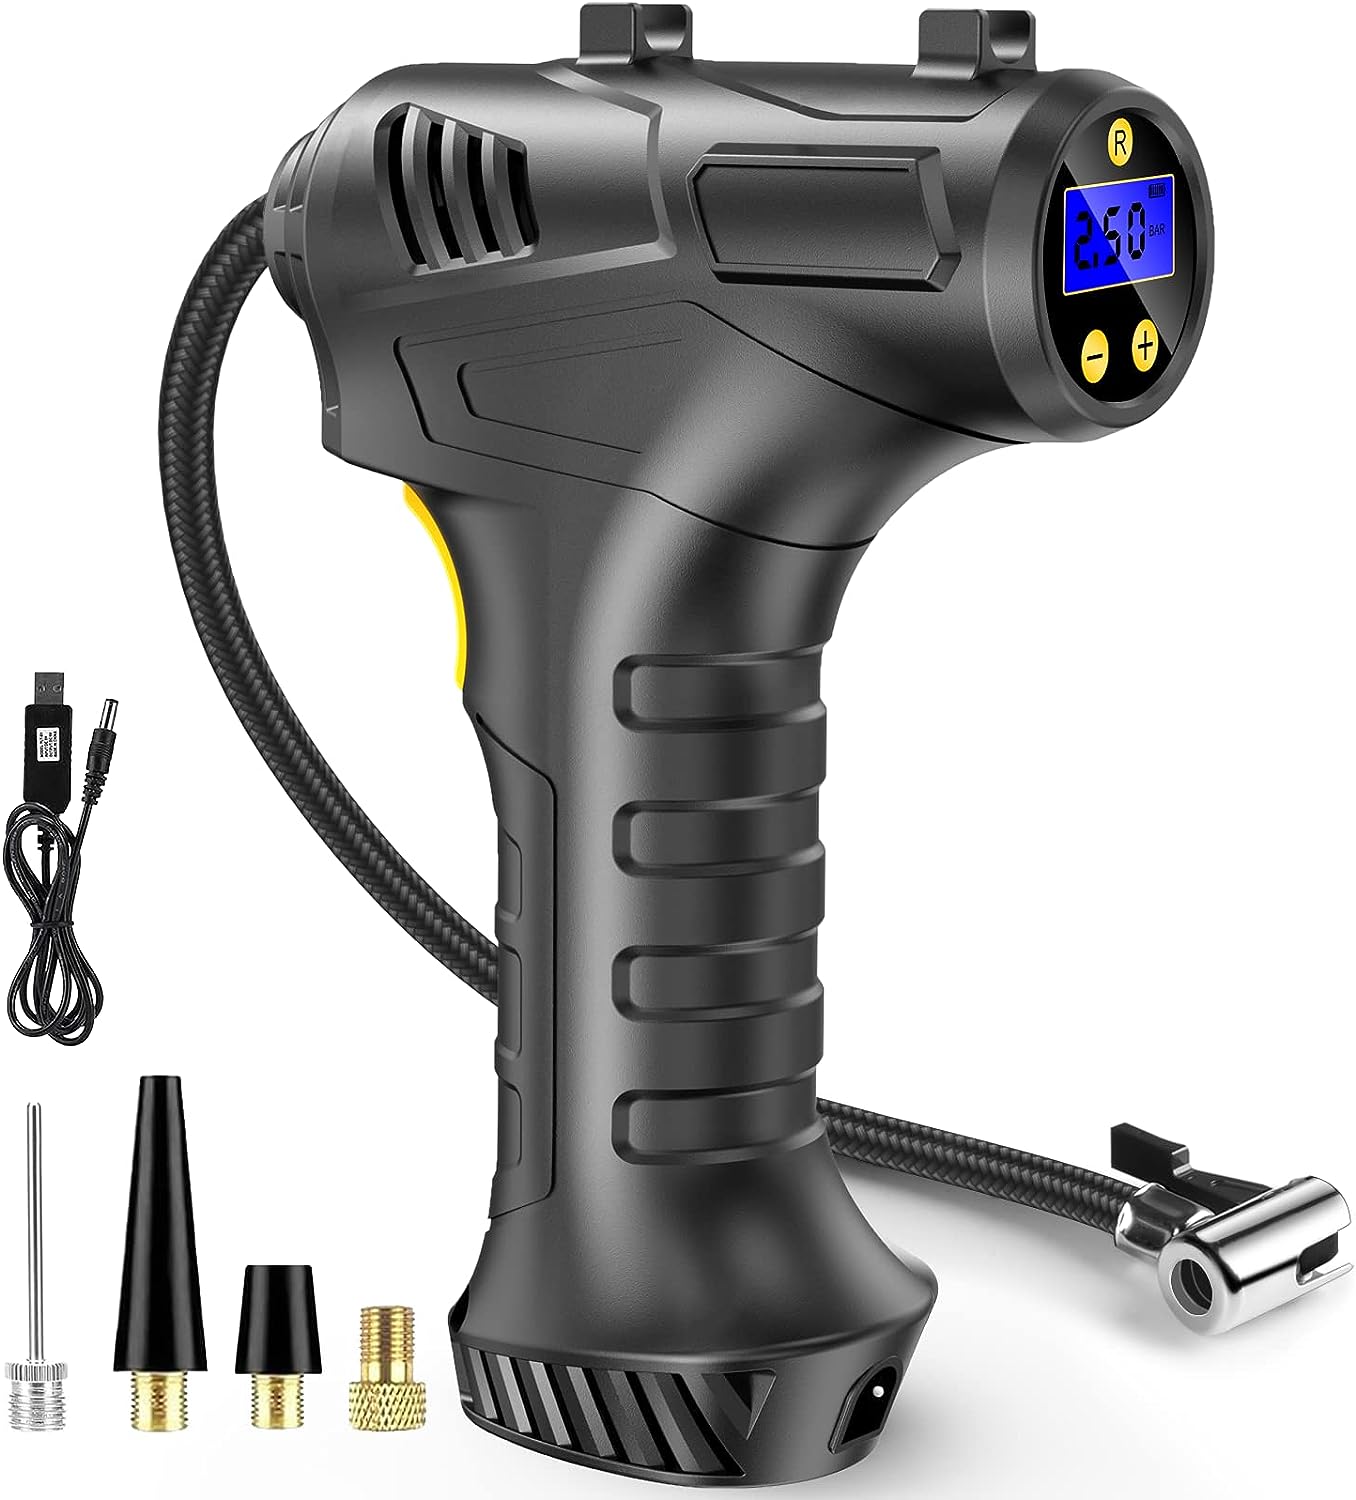 Meet the Etship Cordless Tyre Inflator: Your Convenient 12V USB Rechargeable Air Compressor for On-the-Go Tire Care!